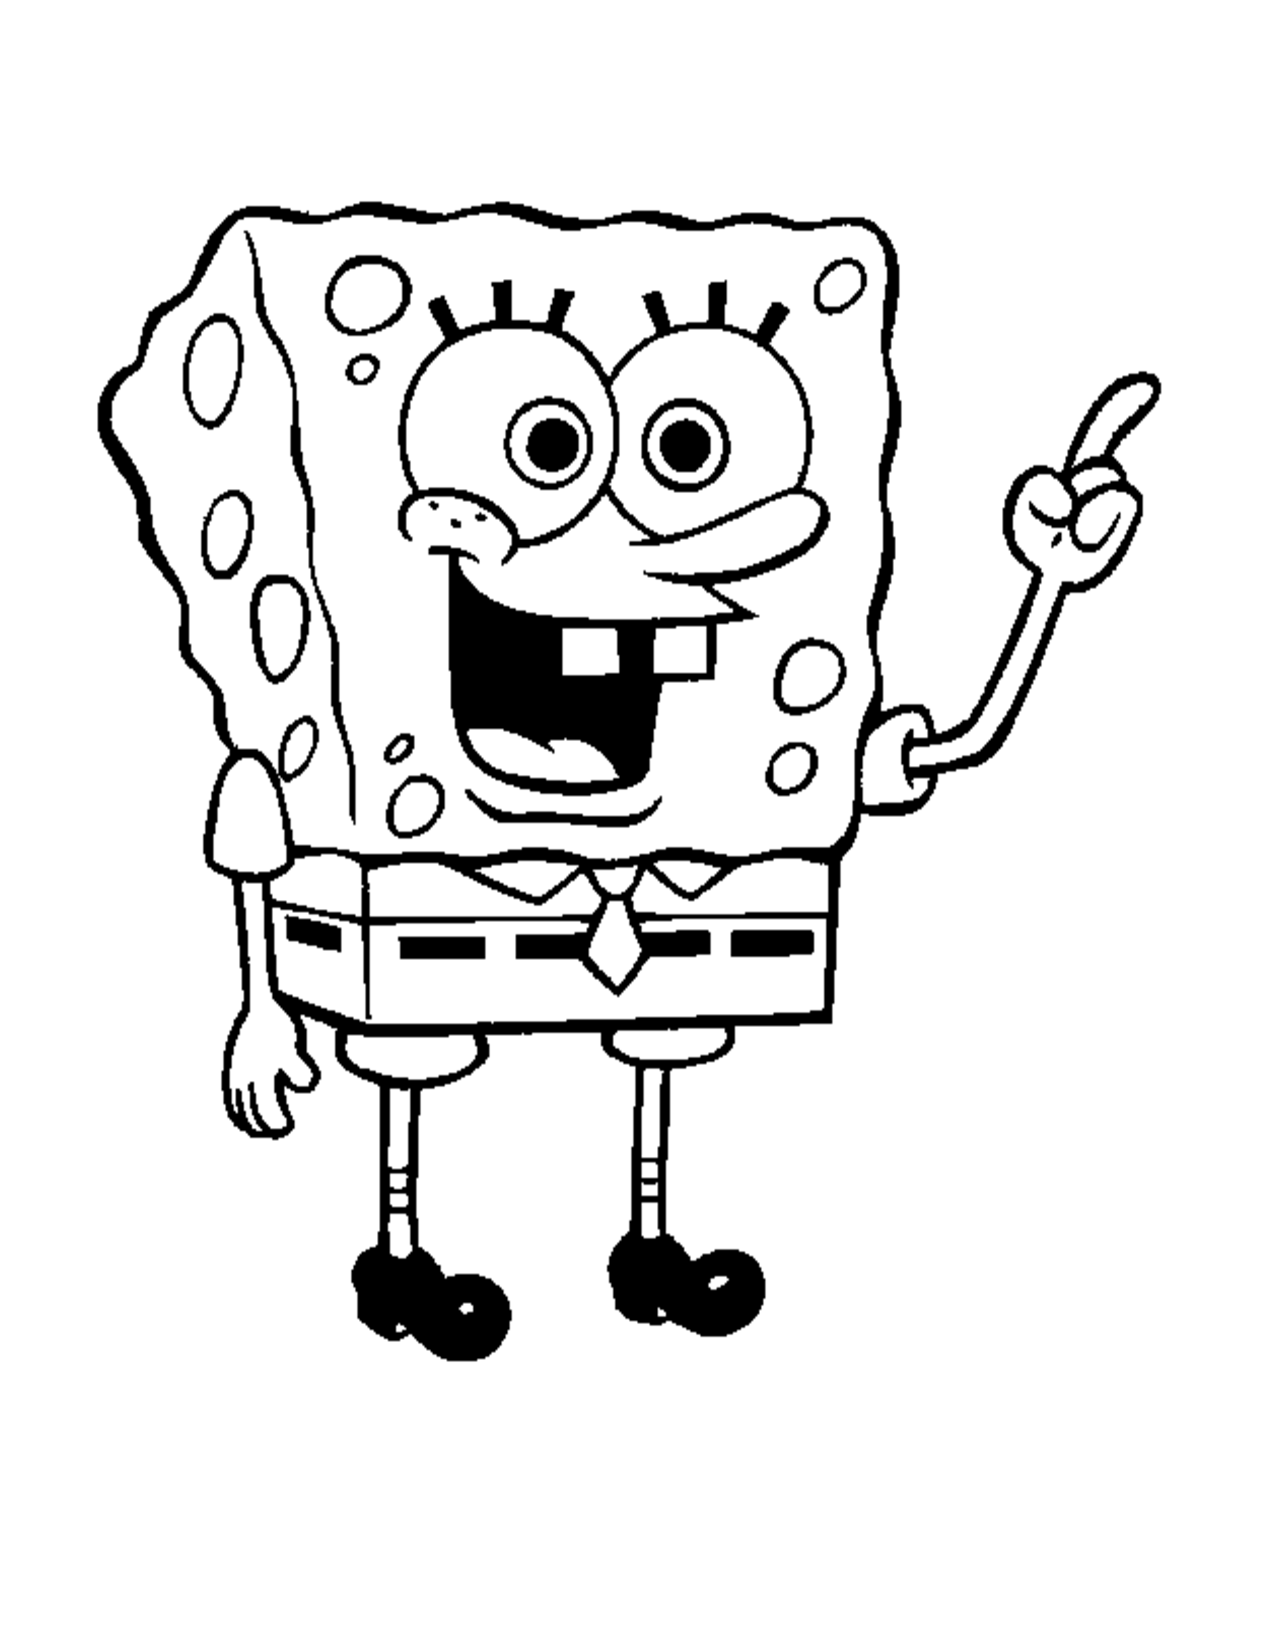 Coloring Pages For Kids Spongebob Hunting Eggs Easter Easter ...